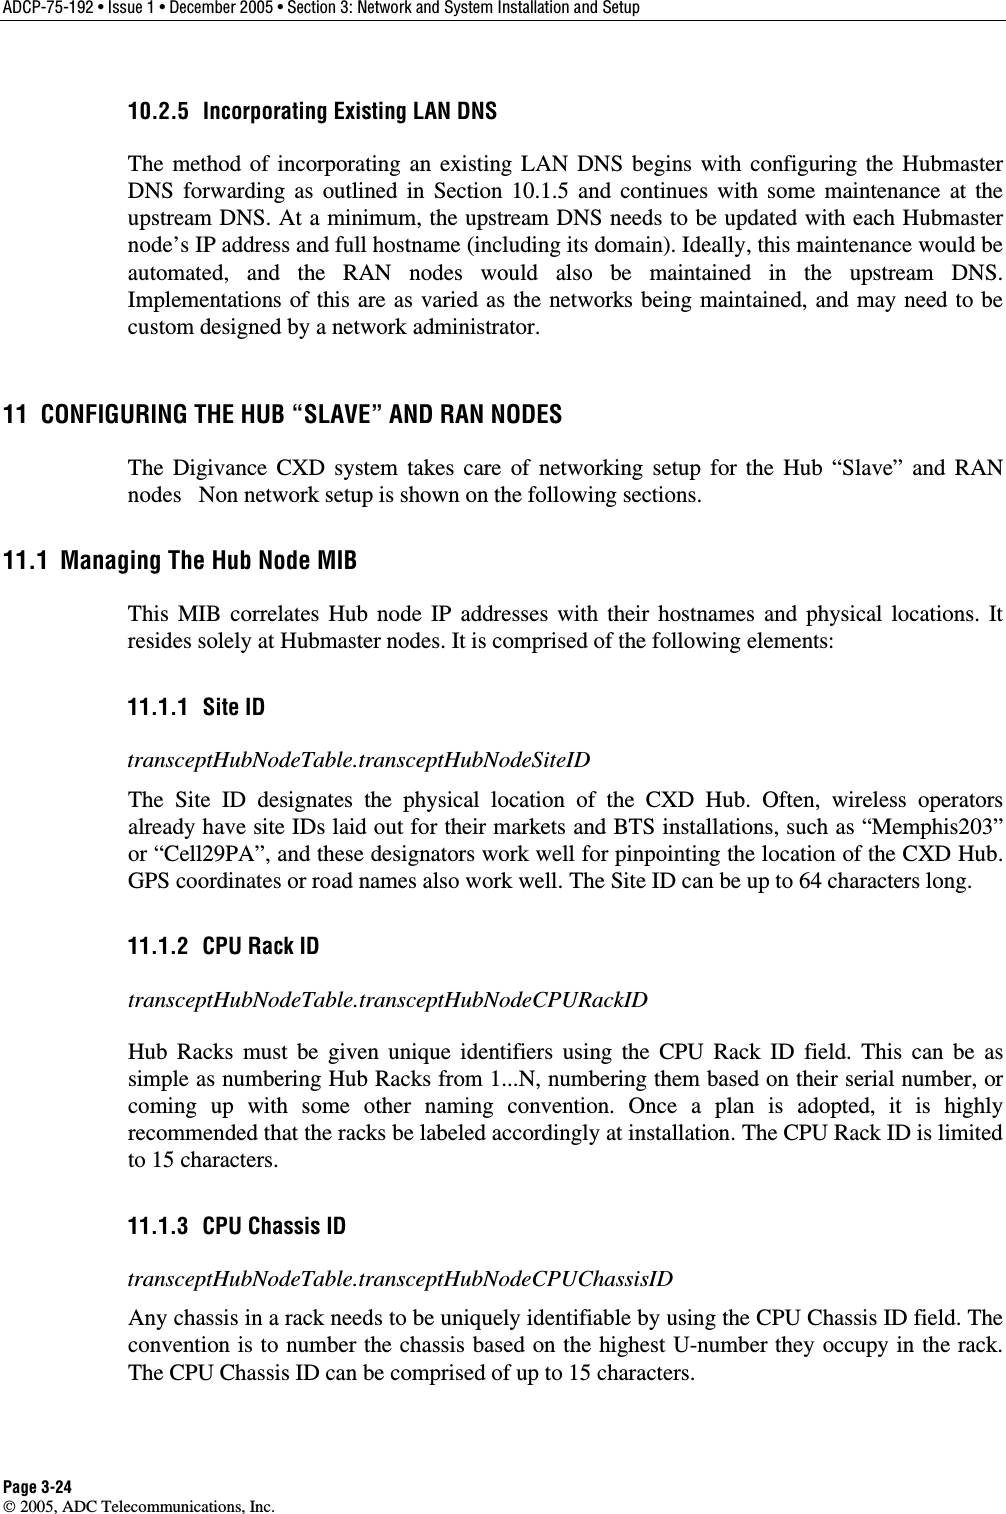 ADCP-75-192 • Issue 1 • December 2005 • Section 3: Network and System Installation and Setup Page 3-24  2005, ADC Telecommunications, Inc. 10.2.5  Incorporating Existing LAN DNS The method of incorporating an existing LAN DNS begins with configuring the Hubmaster DNS forwarding as outlined in Section 10.1.5 and continues with some maintenance at the upstream DNS. At a minimum, the upstream DNS needs to be updated with each Hubmaster node’s IP address and full hostname (including its domain). Ideally, this maintenance would be automated, and the RAN nodes would also be maintained in the upstream DNS. Implementations of this are as varied as the networks being maintained, and may need to be custom designed by a network administrator. 11  CONFIGURING THE HUB “SLAVE” AND RAN NODES The Digivance CXD system takes care of networking setup for the Hub “Slave” and RAN nodes   Non network setup is shown on the following sections. 11.1  Managing The Hub Node MIB This MIB correlates Hub node IP addresses with their hostnames and physical locations. It resides solely at Hubmaster nodes. It is comprised of the following elements: 11.1.1 Site ID transceptHubNodeTable.transceptHubNodeSiteID The Site ID designates the physical location of the CXD Hub. Often, wireless operators already have site IDs laid out for their markets and BTS installations, such as “Memphis203” or “Cell29PA”, and these designators work well for pinpointing the location of the CXD Hub. GPS coordinates or road names also work well. The Site ID can be up to 64 characters long. 11.1.2  CPU Rack ID transceptHubNodeTable.transceptHubNodeCPURackID Hub Racks must be given unique identifiers using the CPU Rack ID field. This can be as simple as numbering Hub Racks from 1...N, numbering them based on their serial number, or coming up with some other naming convention. Once a plan is adopted, it is highly recommended that the racks be labeled accordingly at installation. The CPU Rack ID is limited to 15 characters. 11.1.3  CPU Chassis ID transceptHubNodeTable.transceptHubNodeCPUChassisID Any chassis in a rack needs to be uniquely identifiable by using the CPU Chassis ID field. The convention is to number the chassis based on the highest U-number they occupy in the rack.  The CPU Chassis ID can be comprised of up to 15 characters. 